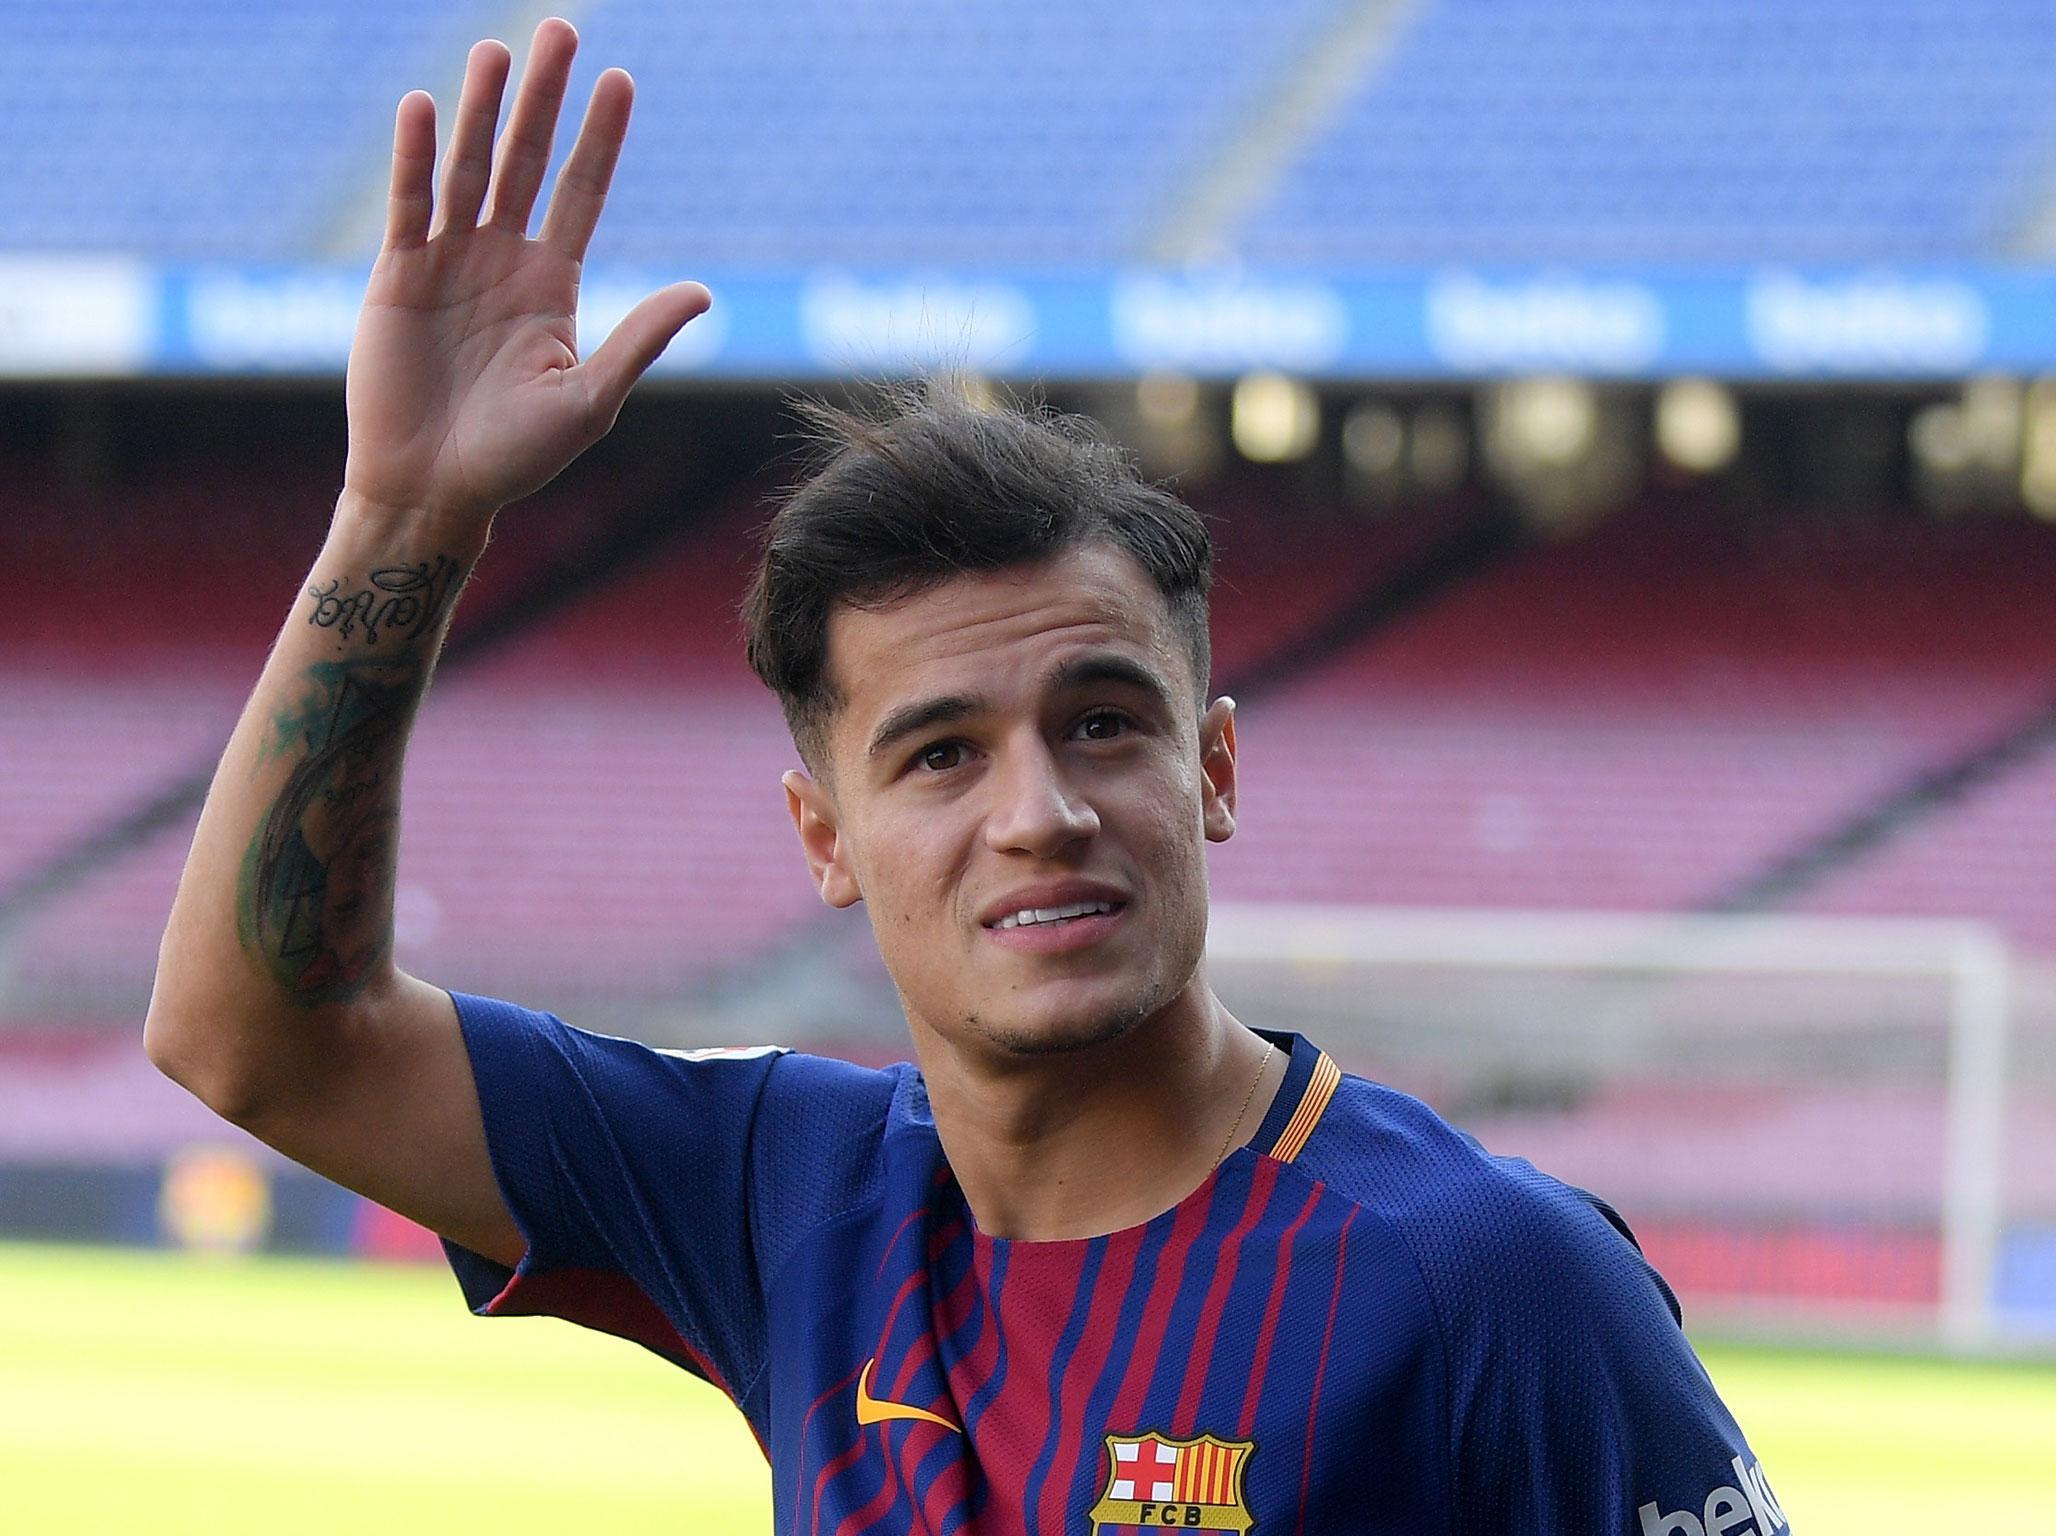 Coutinho made his long-awaited move to Barca this winter